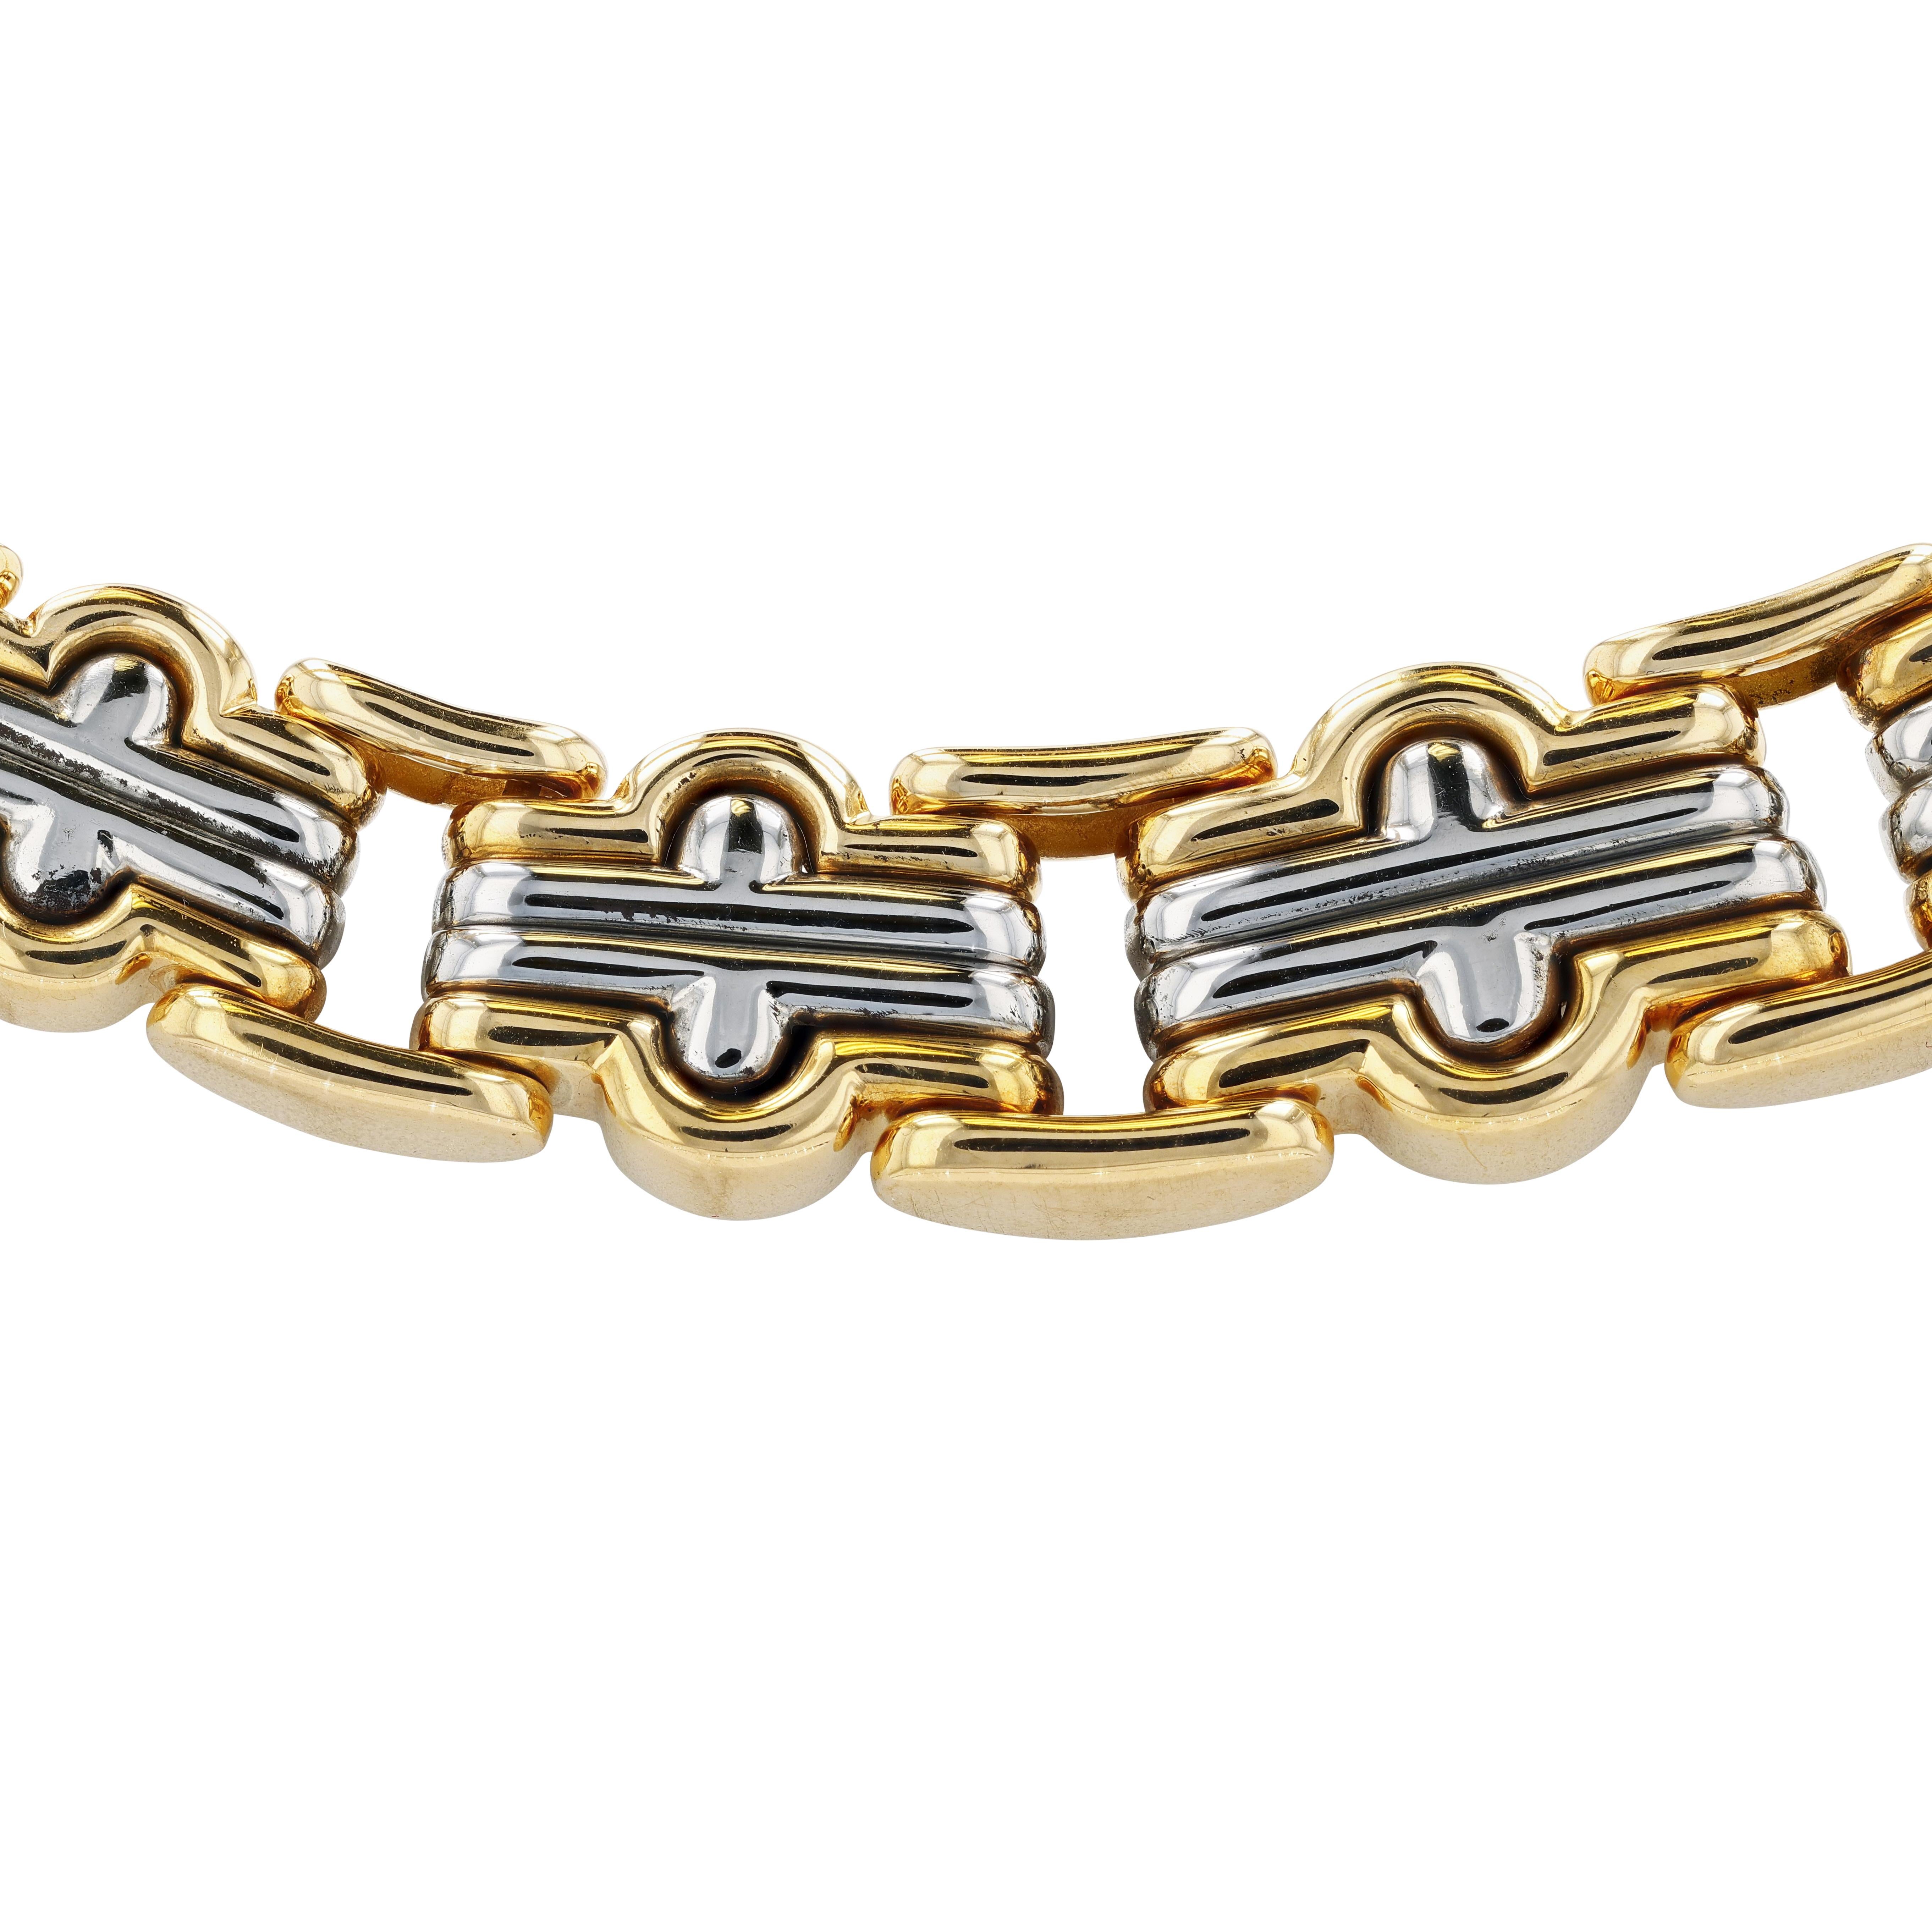 Bulgari Parentesi choker necklace in 18 karat yellow gold and stainless steel. The necklace featuring graduated links front to back with a high polished finish and safety clasp. Signed Bulgari. Inner circumference 38.5 cm. 

Designed in 1982 by